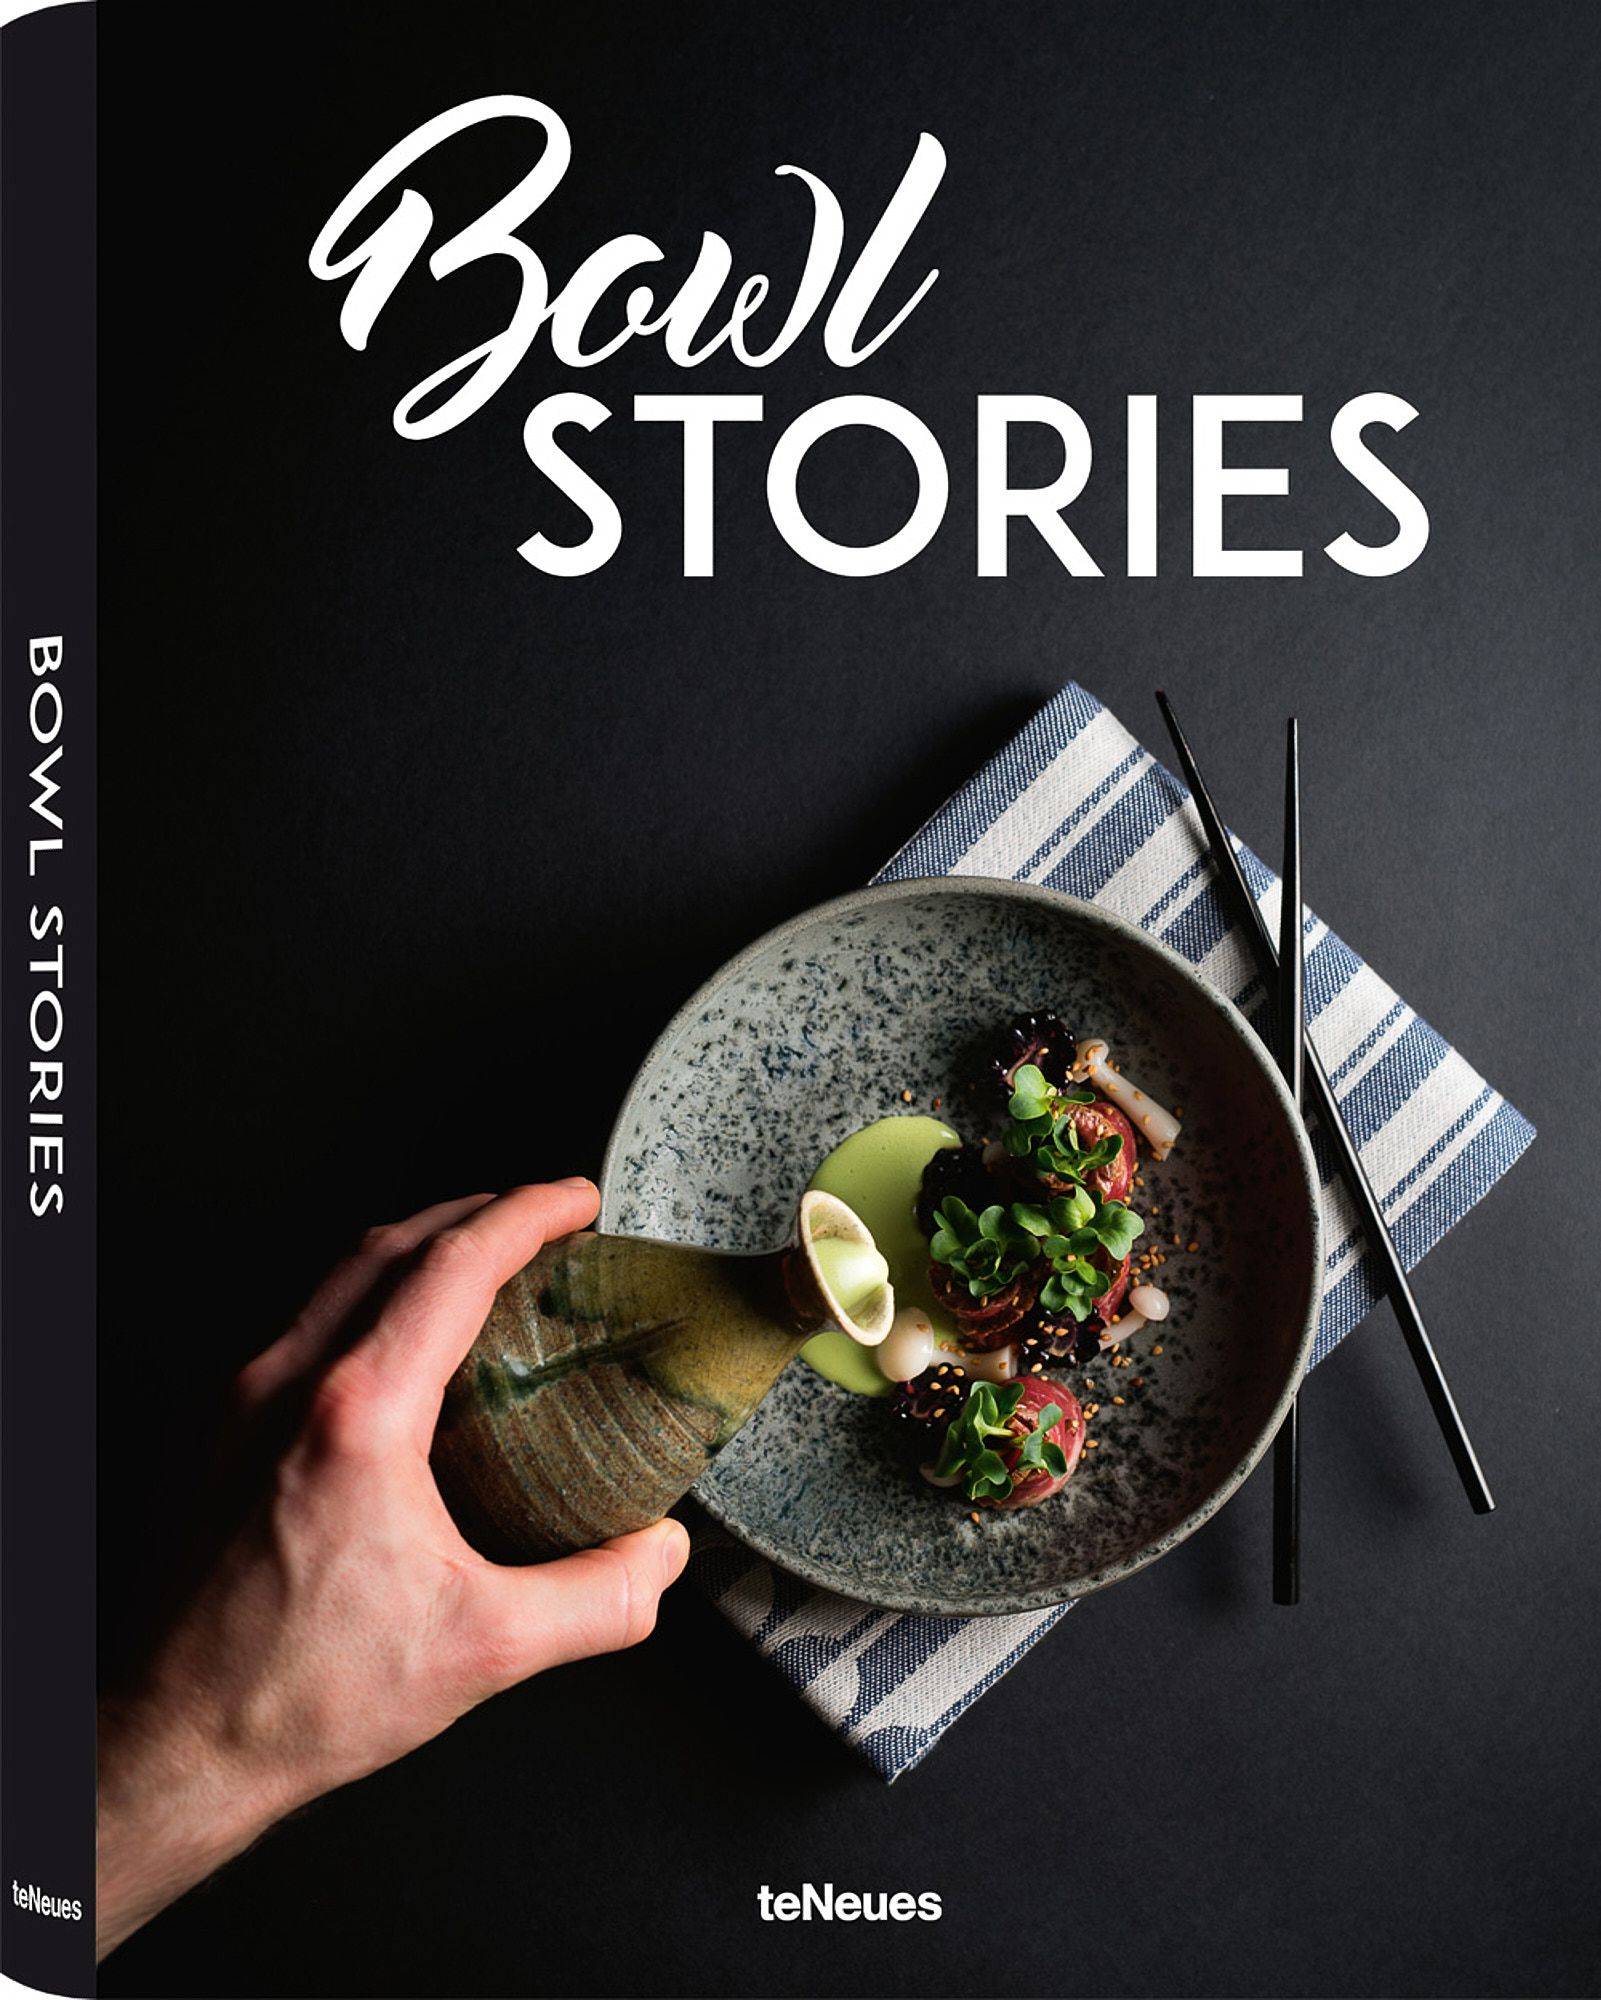 the bowl stories cookbook by ben donathcover